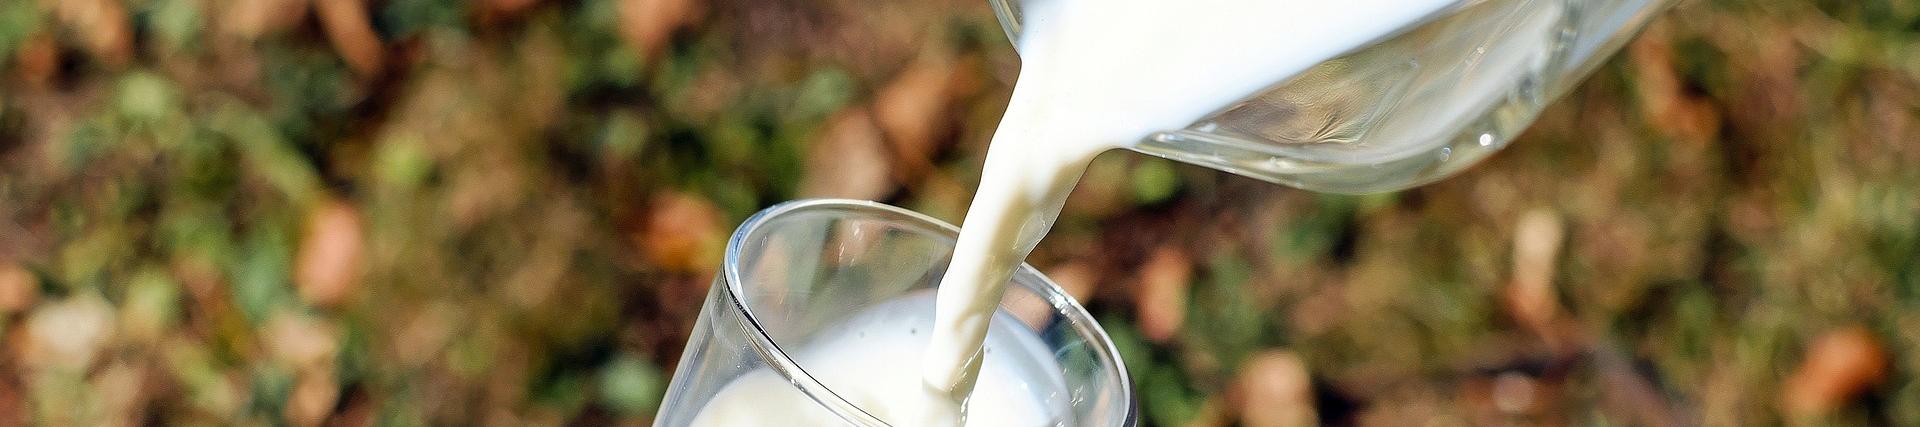 A glass being filled with milk from a jug